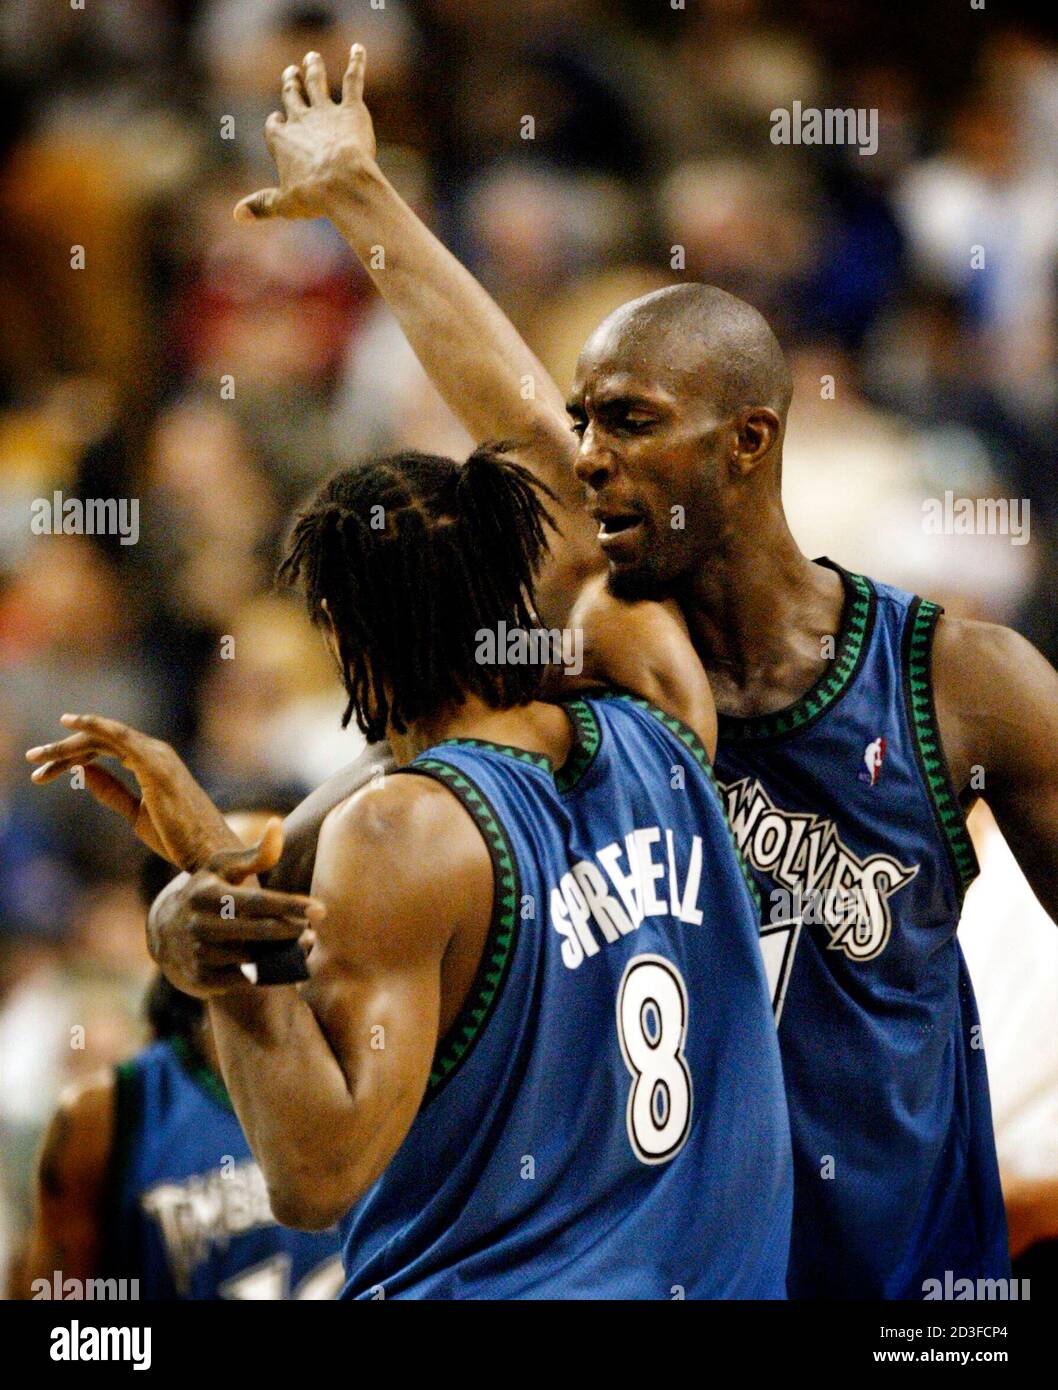 Sprewell High Resolution Stock Photography and Images - Alamy